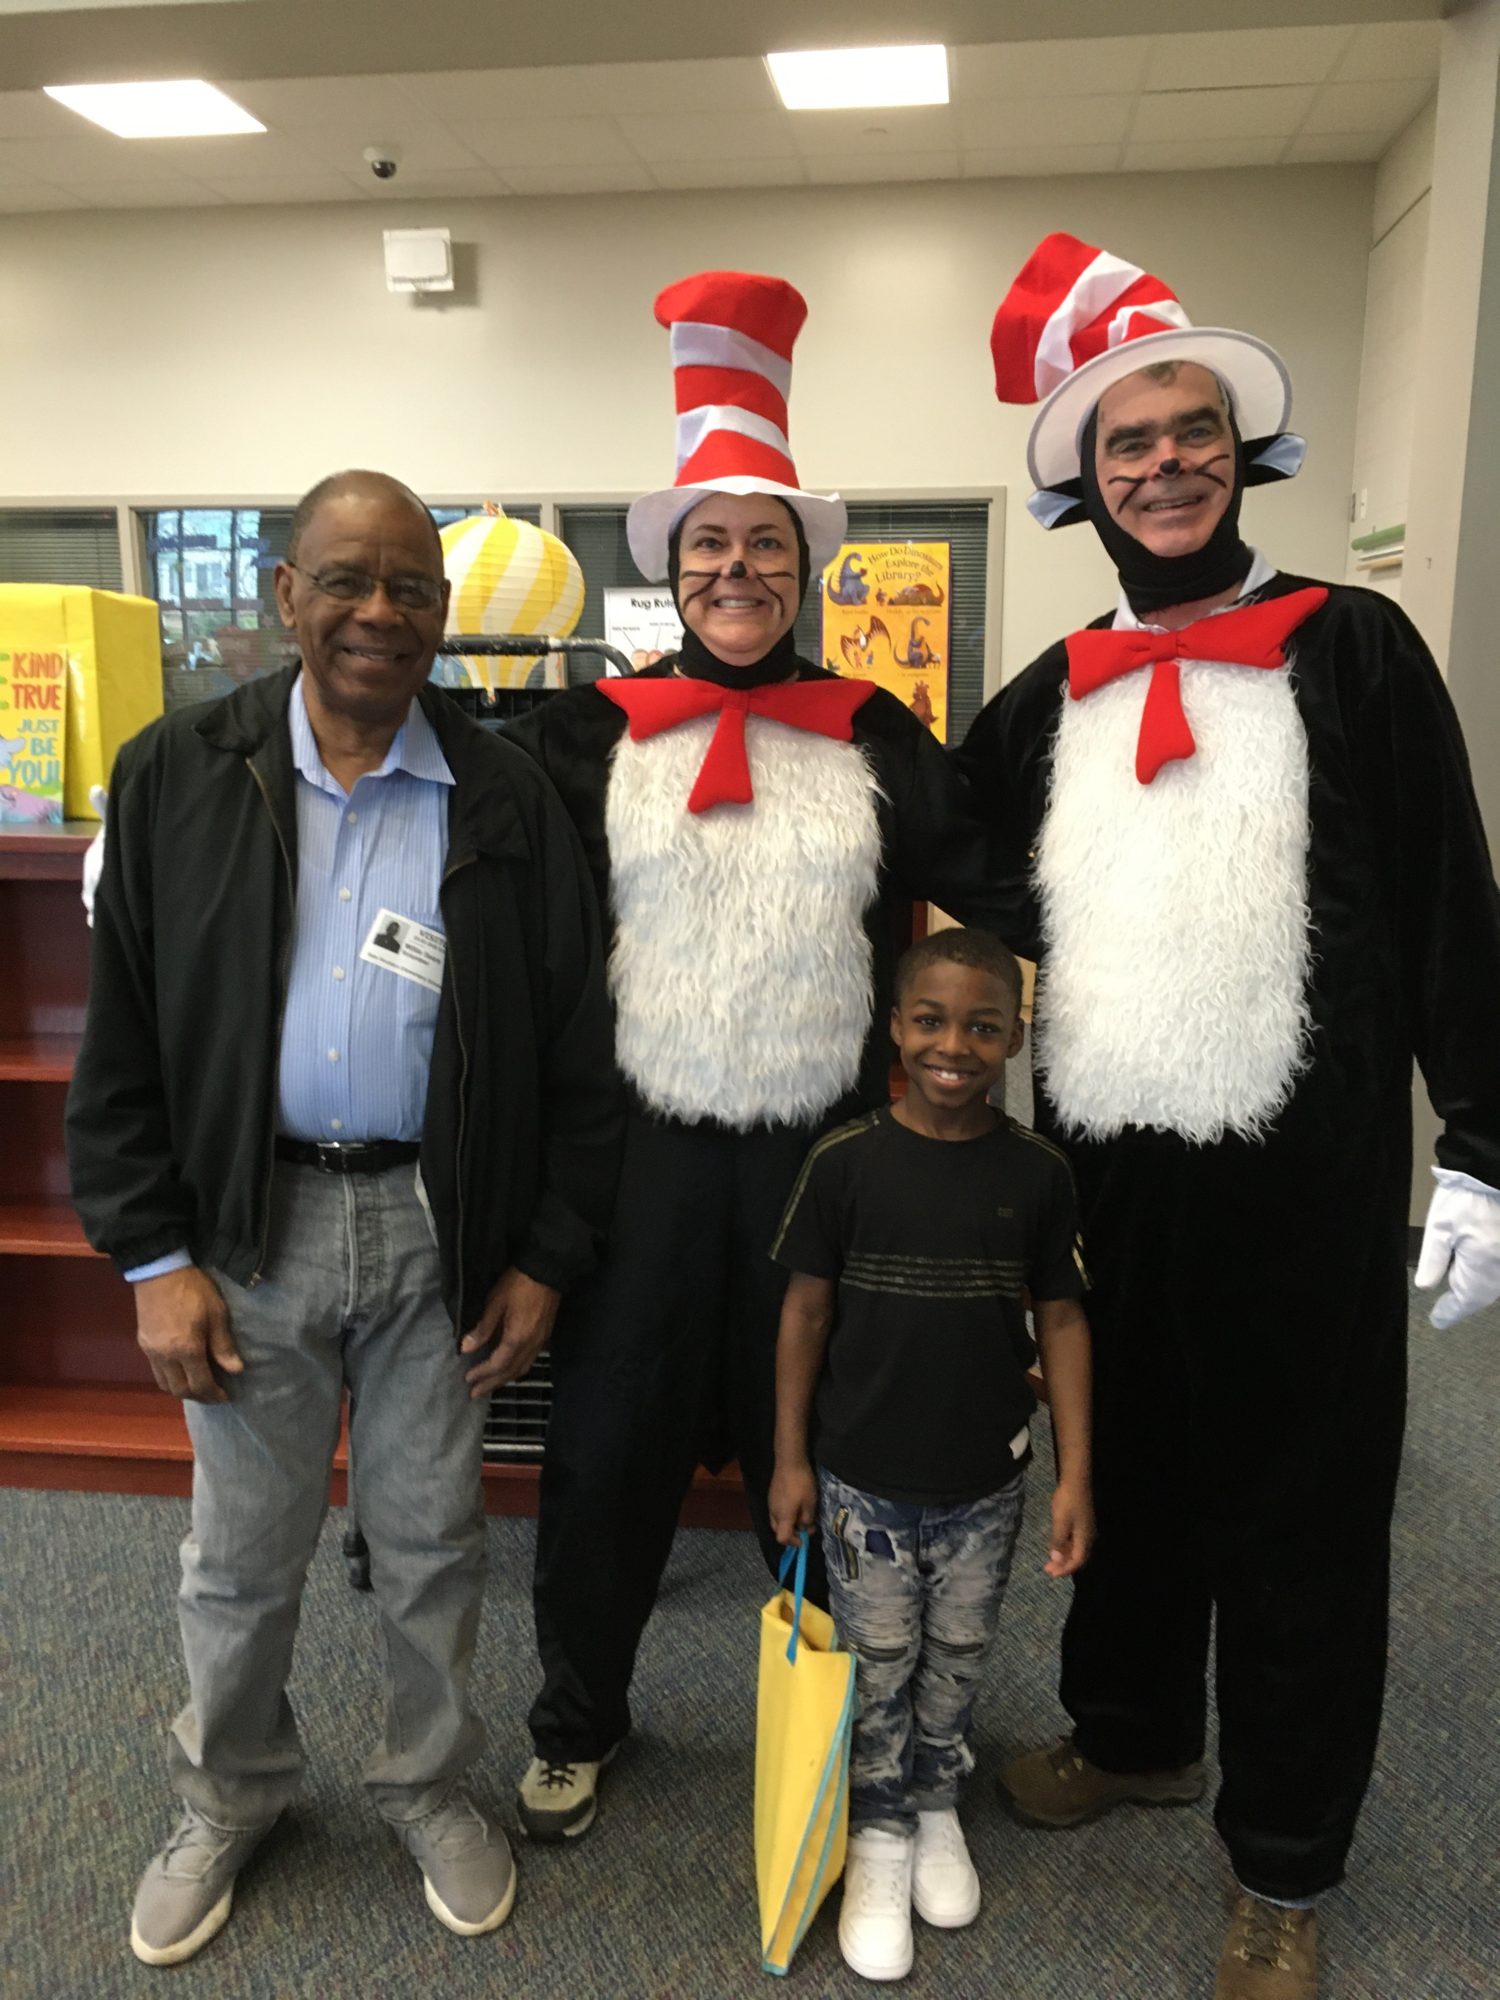 "two adults dressed like Cat in the Hat pose with a child and an adult"